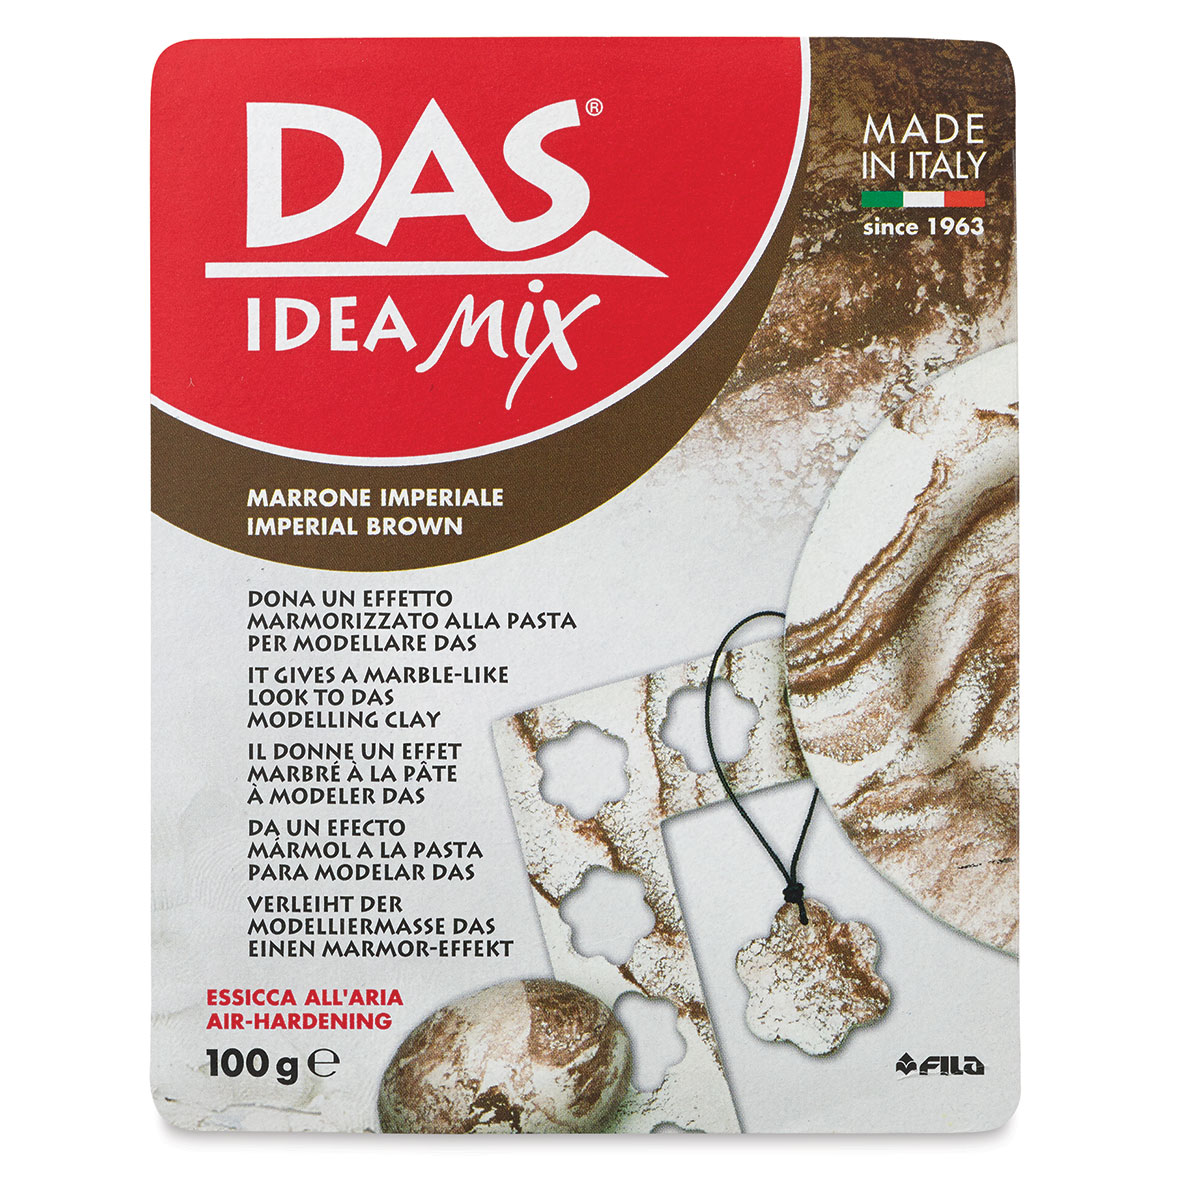 DAS IDEA MIX AIR DRYING MODELLING CLAY CREATE A MARBLE MARBLING EFFECT 100g  6 Colors